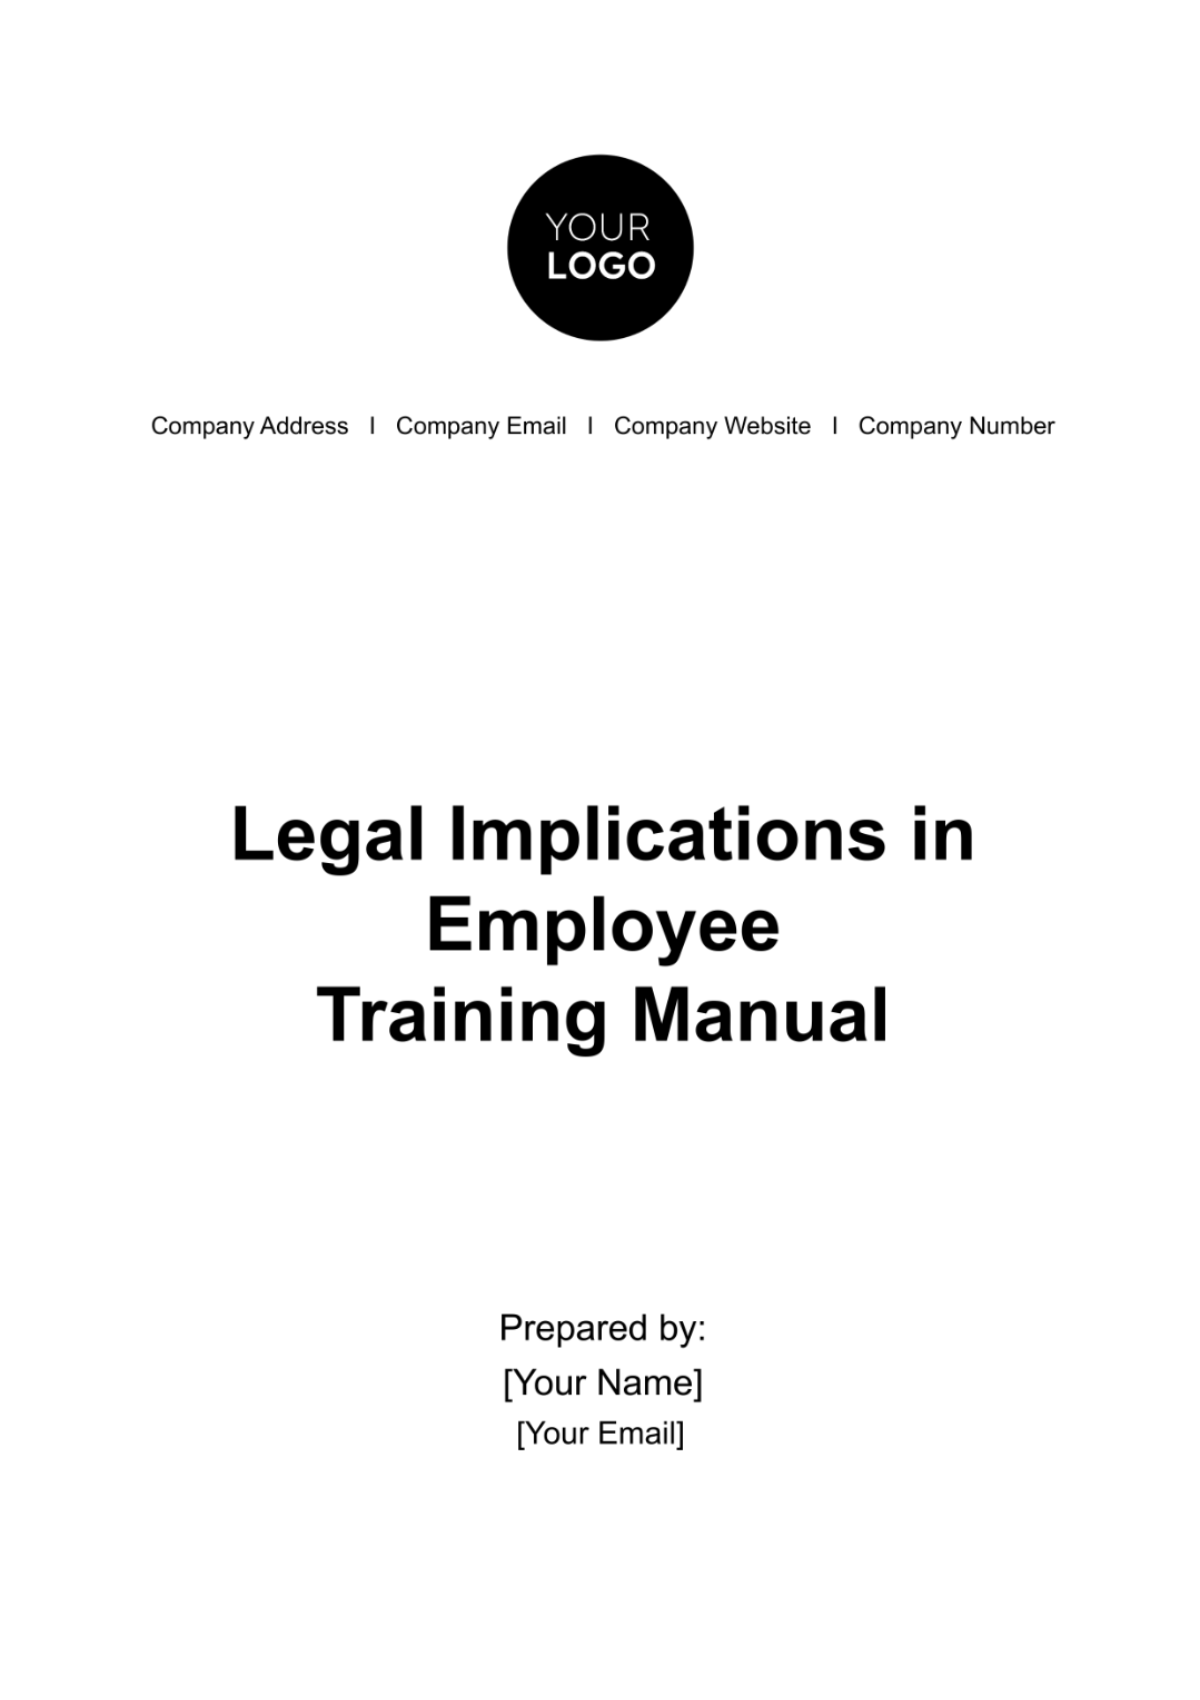 Free Legal Implications in Employee Training Manual HR Template